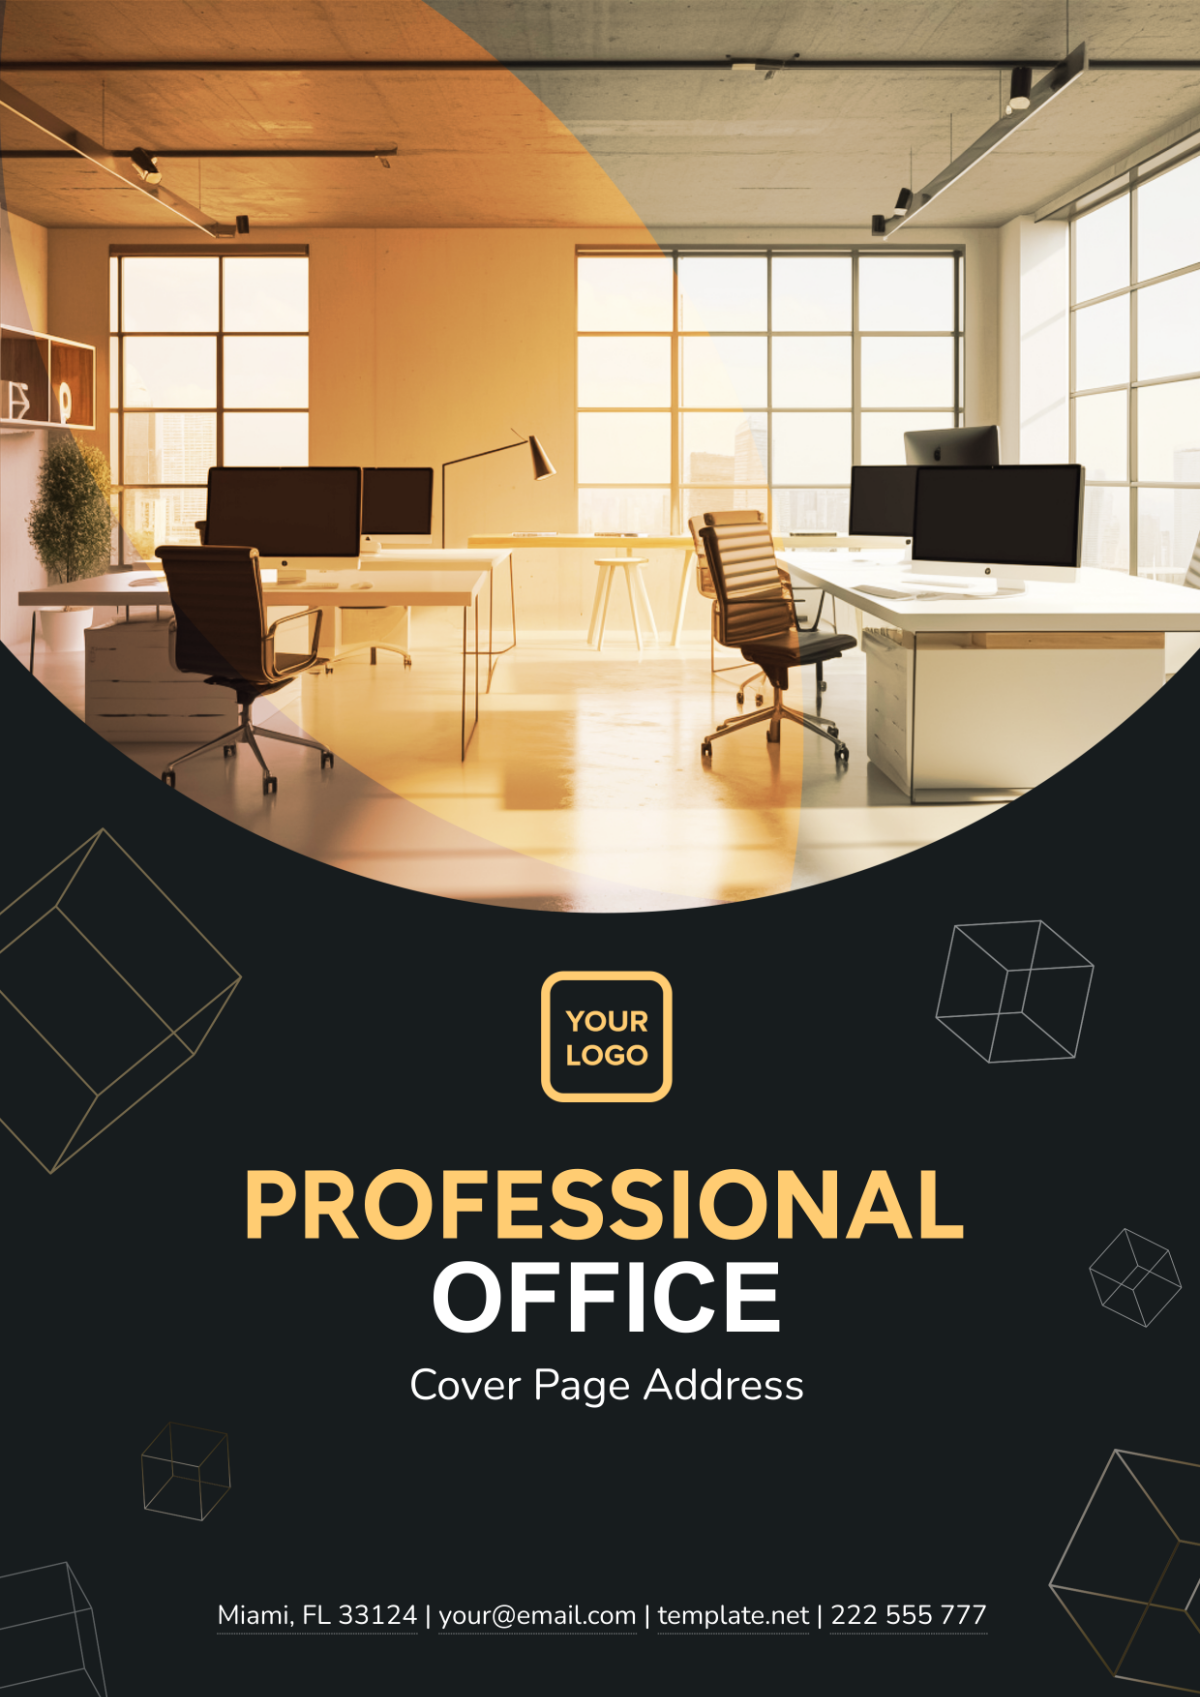 Free Professional Office Cover Page Address Template